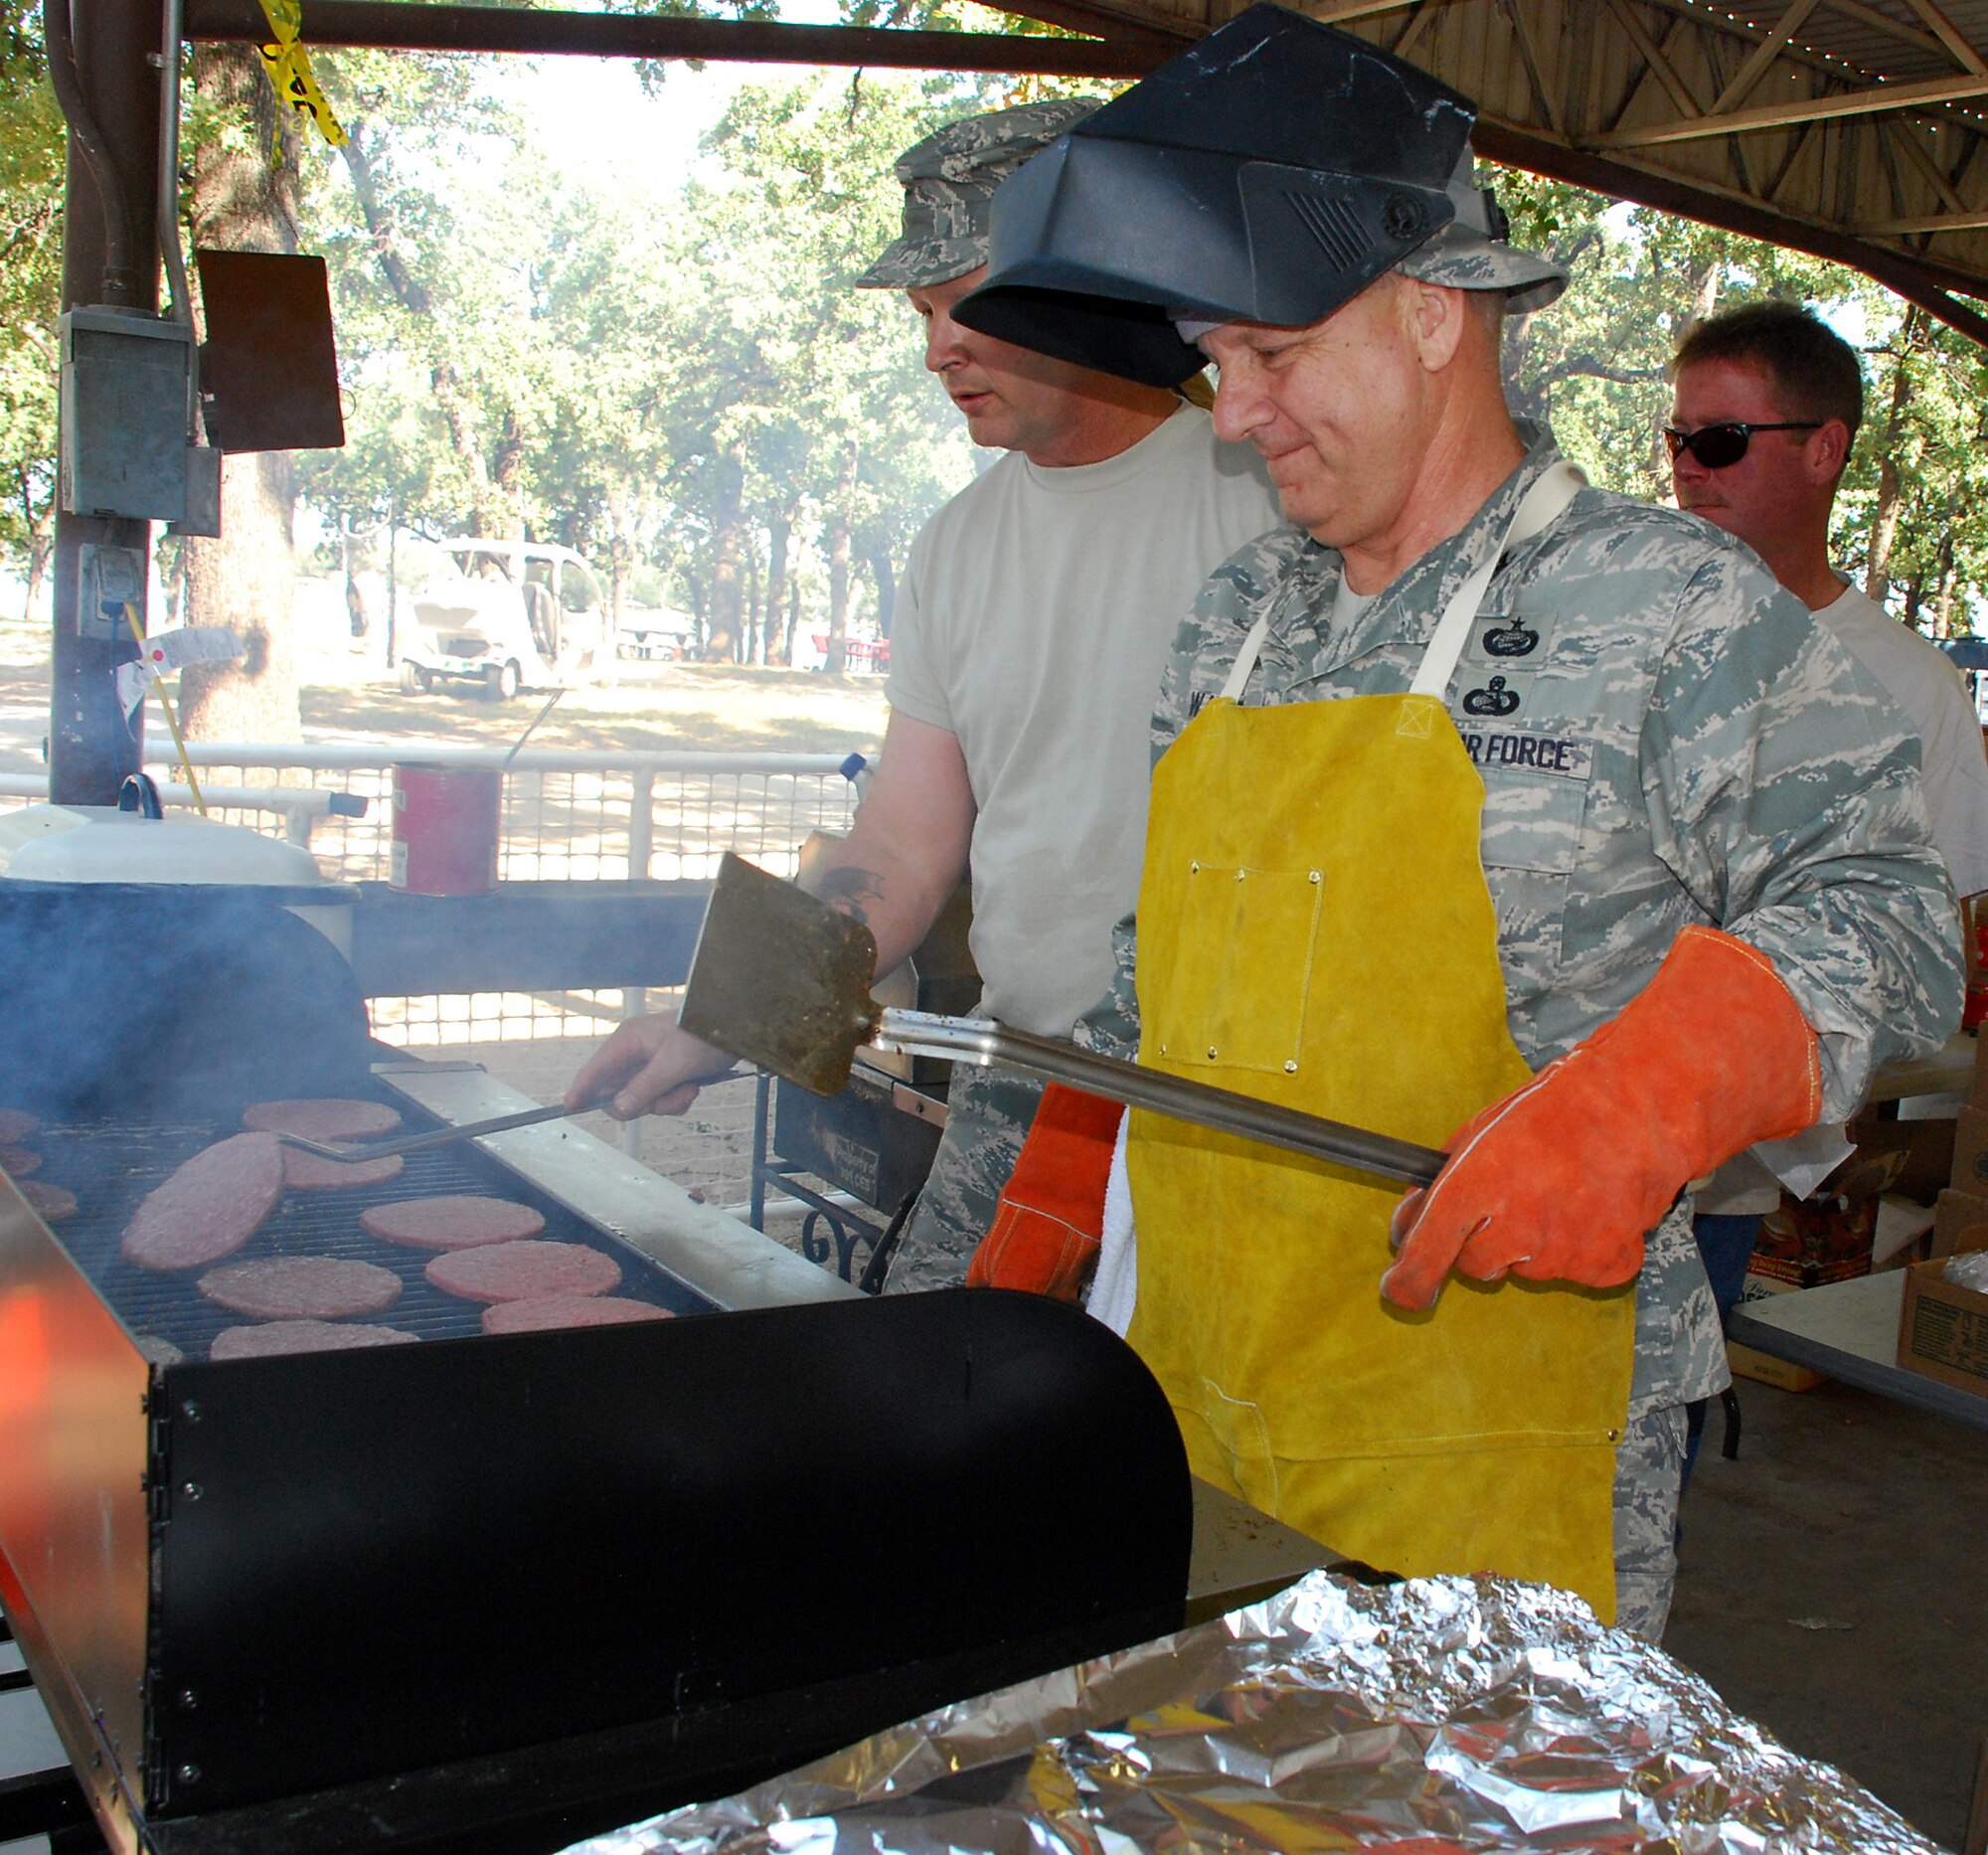 Col. Jolyon Walker, 301st Mission Support Group commander, takes to flipping burgers in the spirit of Family Day at the base marina. Thousands of food portions were passed off to hungry patrons. A representative from the 301st Services Flight commented there were so many people being served that had to go buy more food. Those still in line didn?t seem to mind much; soon mobile food servers began handed out burgers to those waiting. (U.S. Air Force Photo/Tech. Sgt. Julie Briden-Garcia)